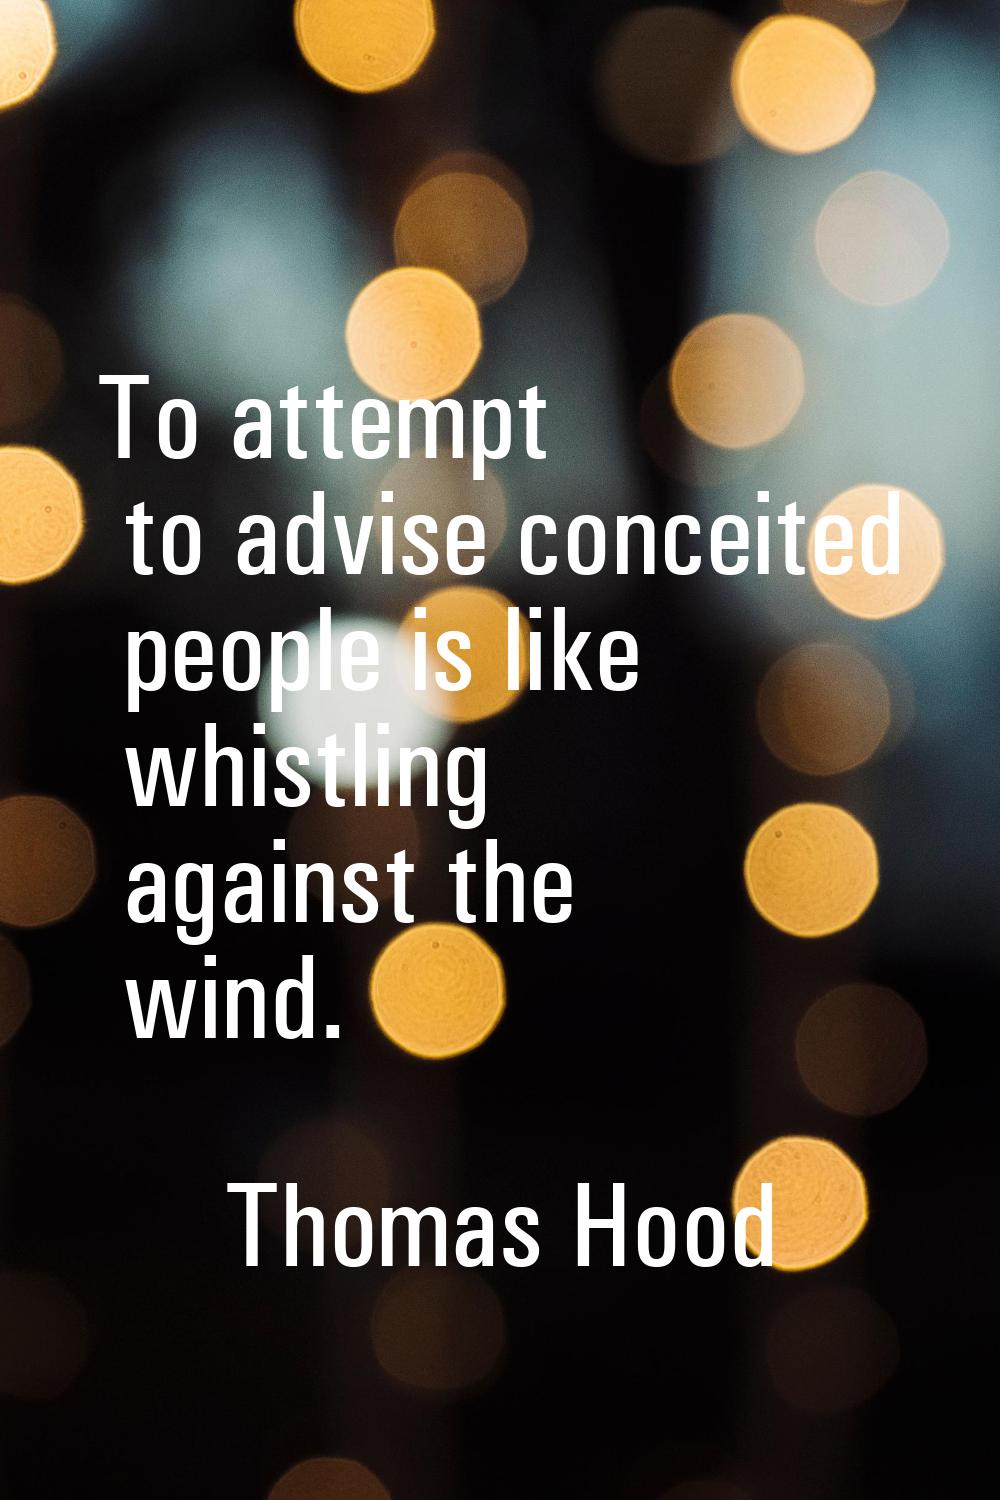 To attempt to advise conceited people is like whistling against the wind.